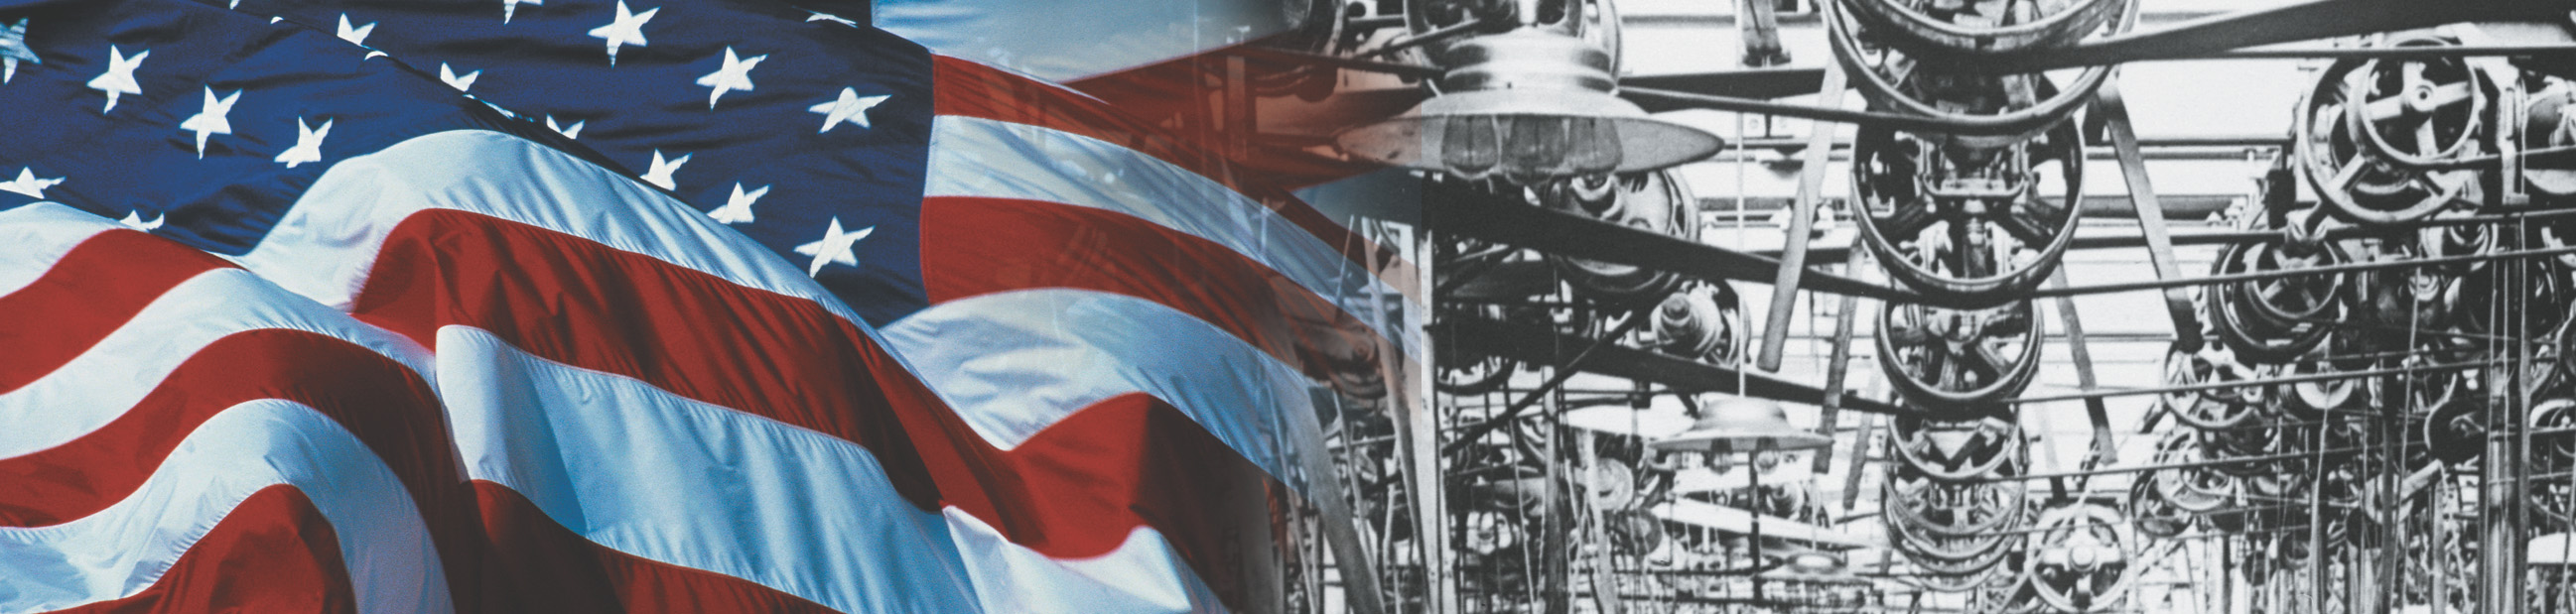 Banner: American flag and machinery